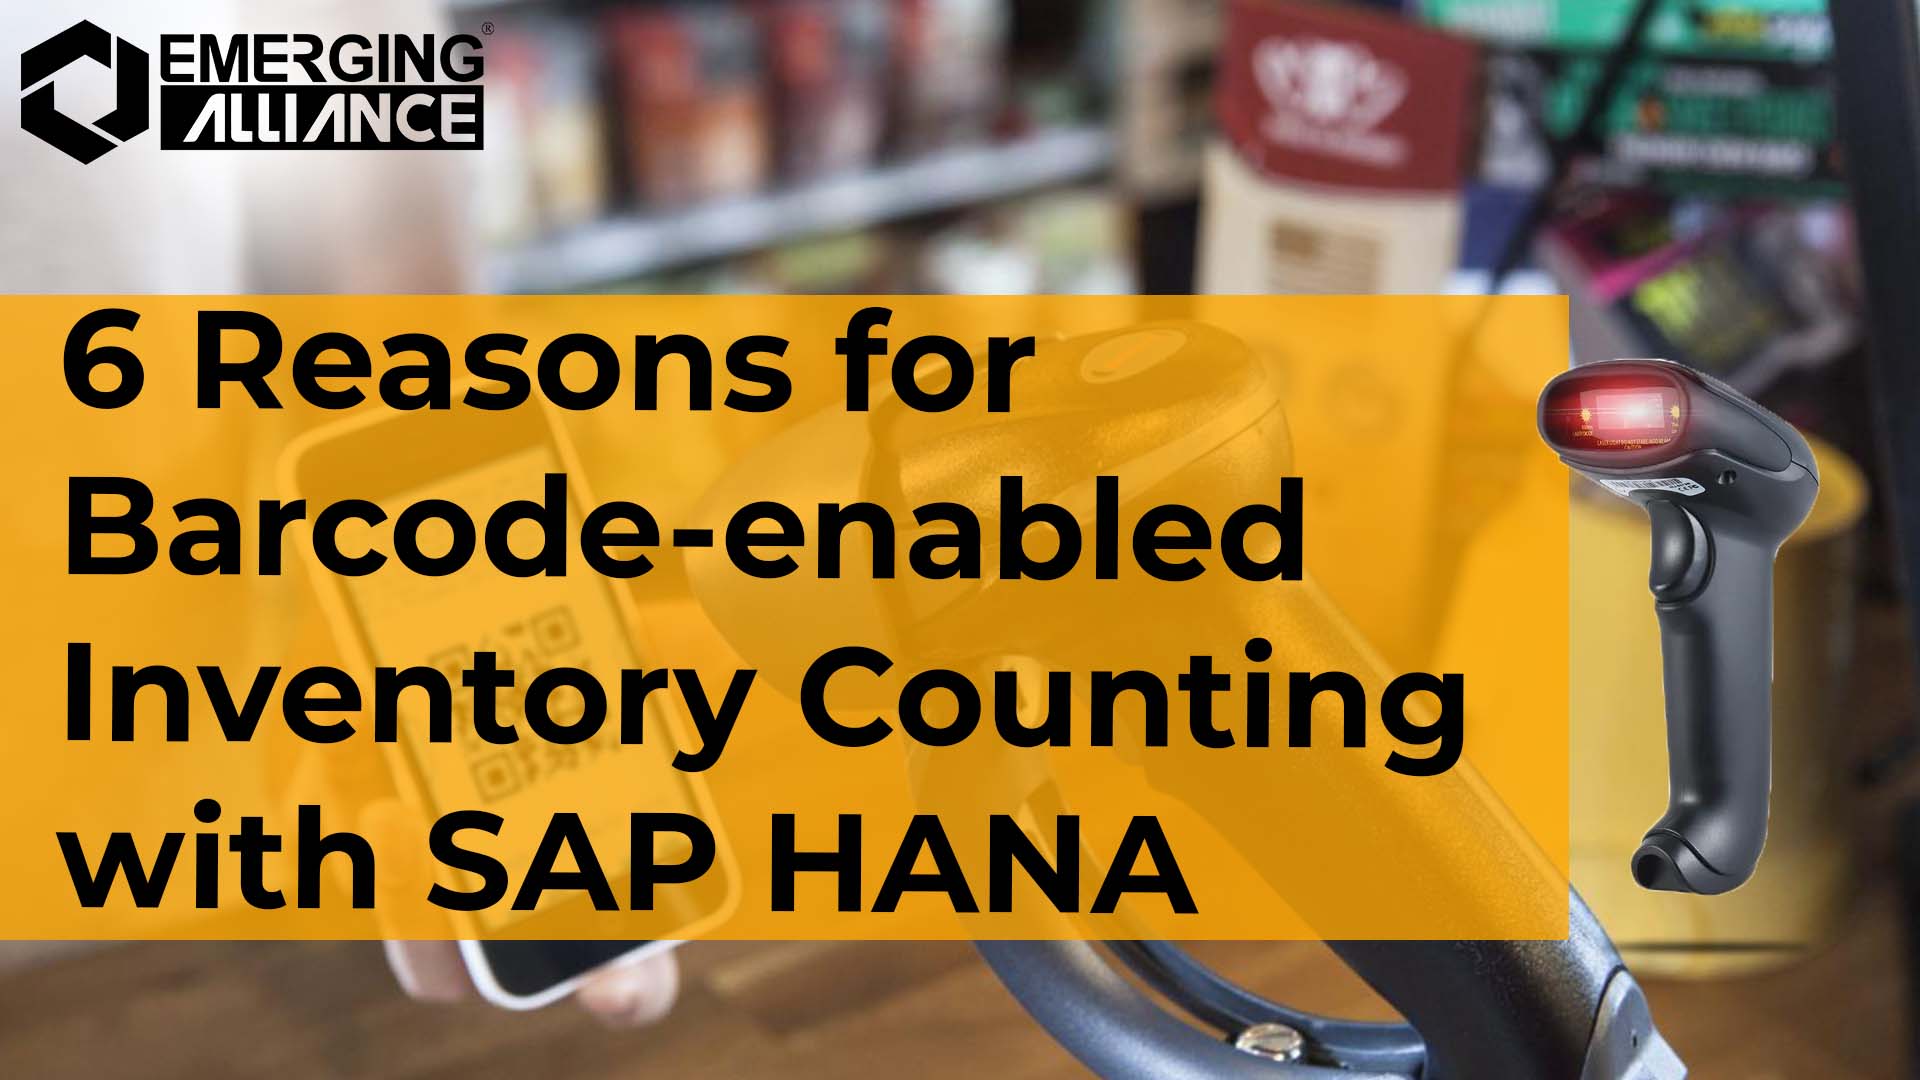 Barcode Enabled Inventory Counting with SAP HANA